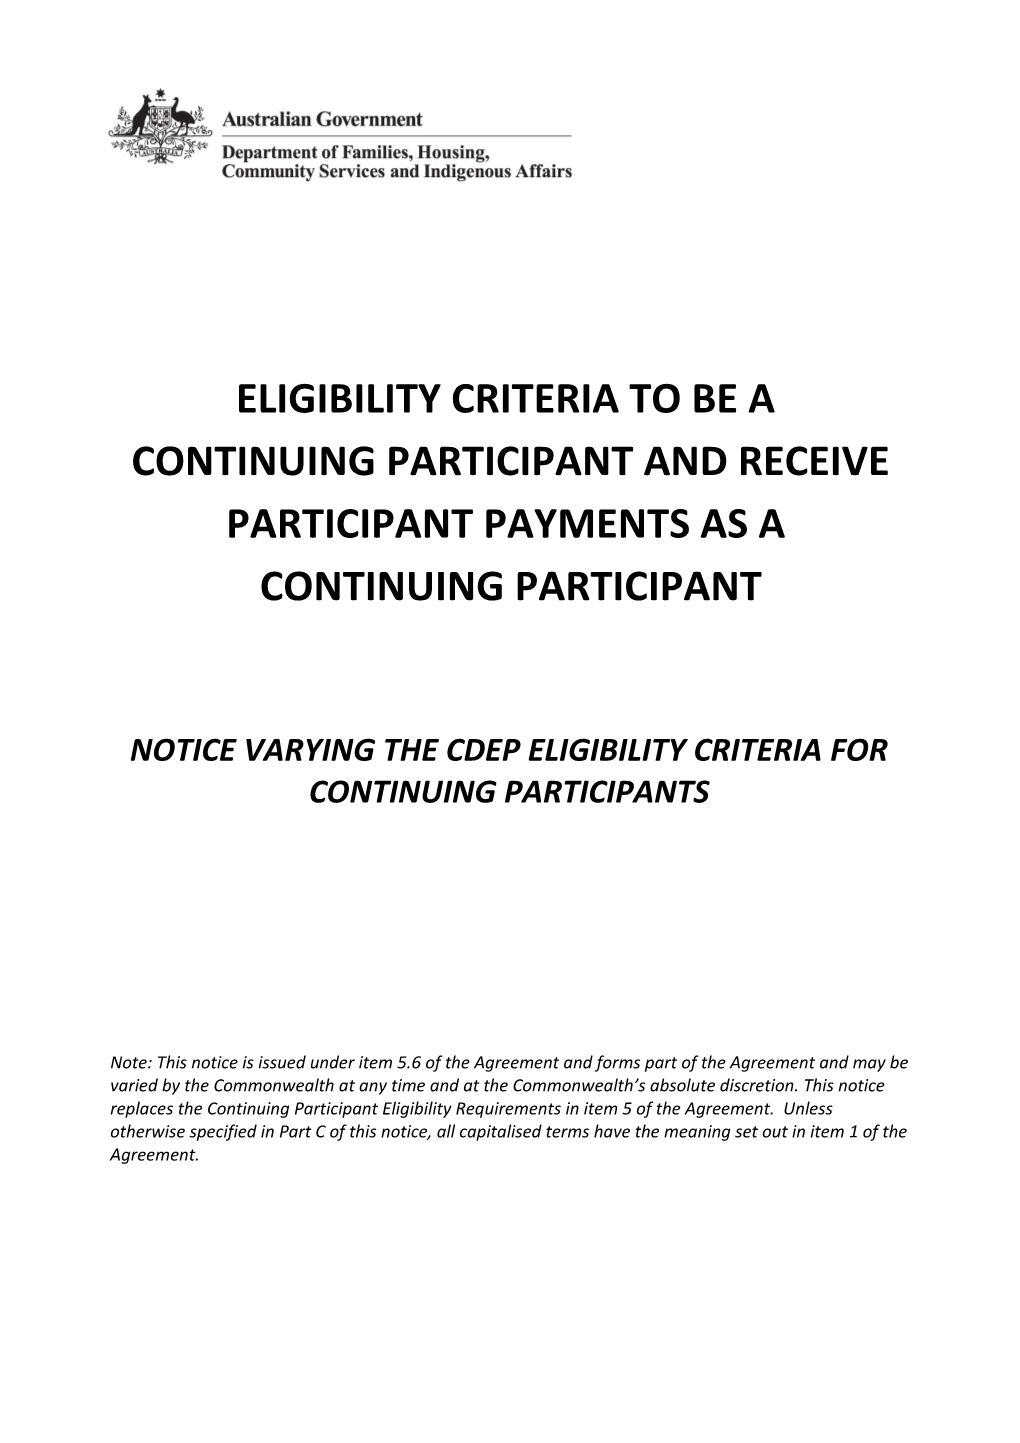 Notice Varying the Cdep Eligibility Criteria for Continuing Participants